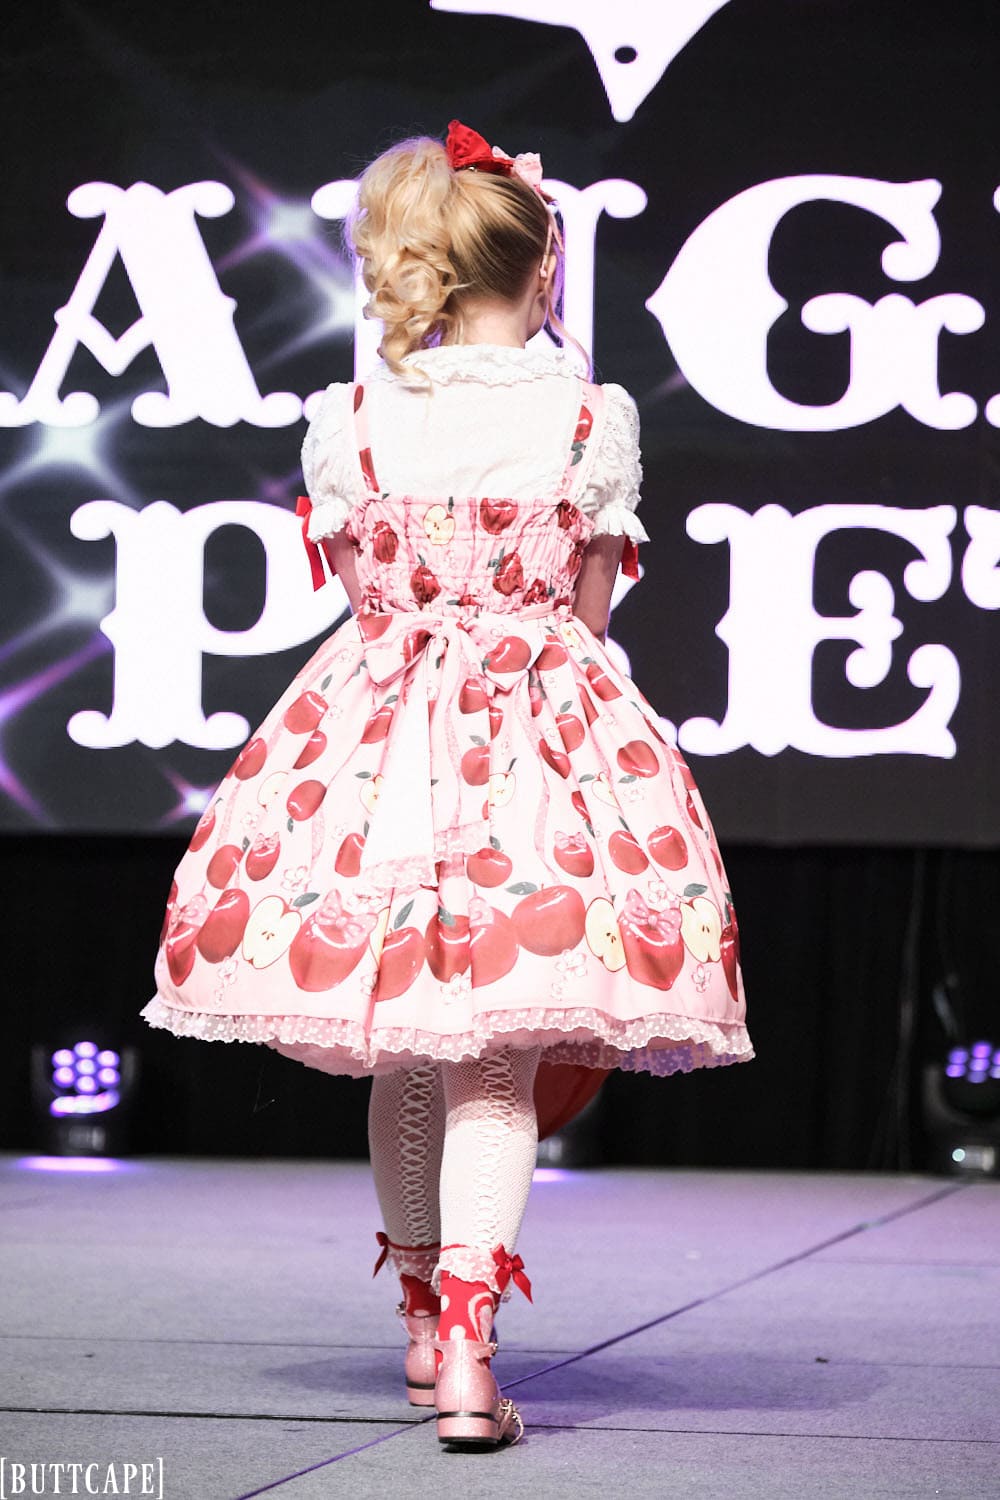 Model 3 wearing pink and red cherry themed lolita outfit holding red heart purse - back view.